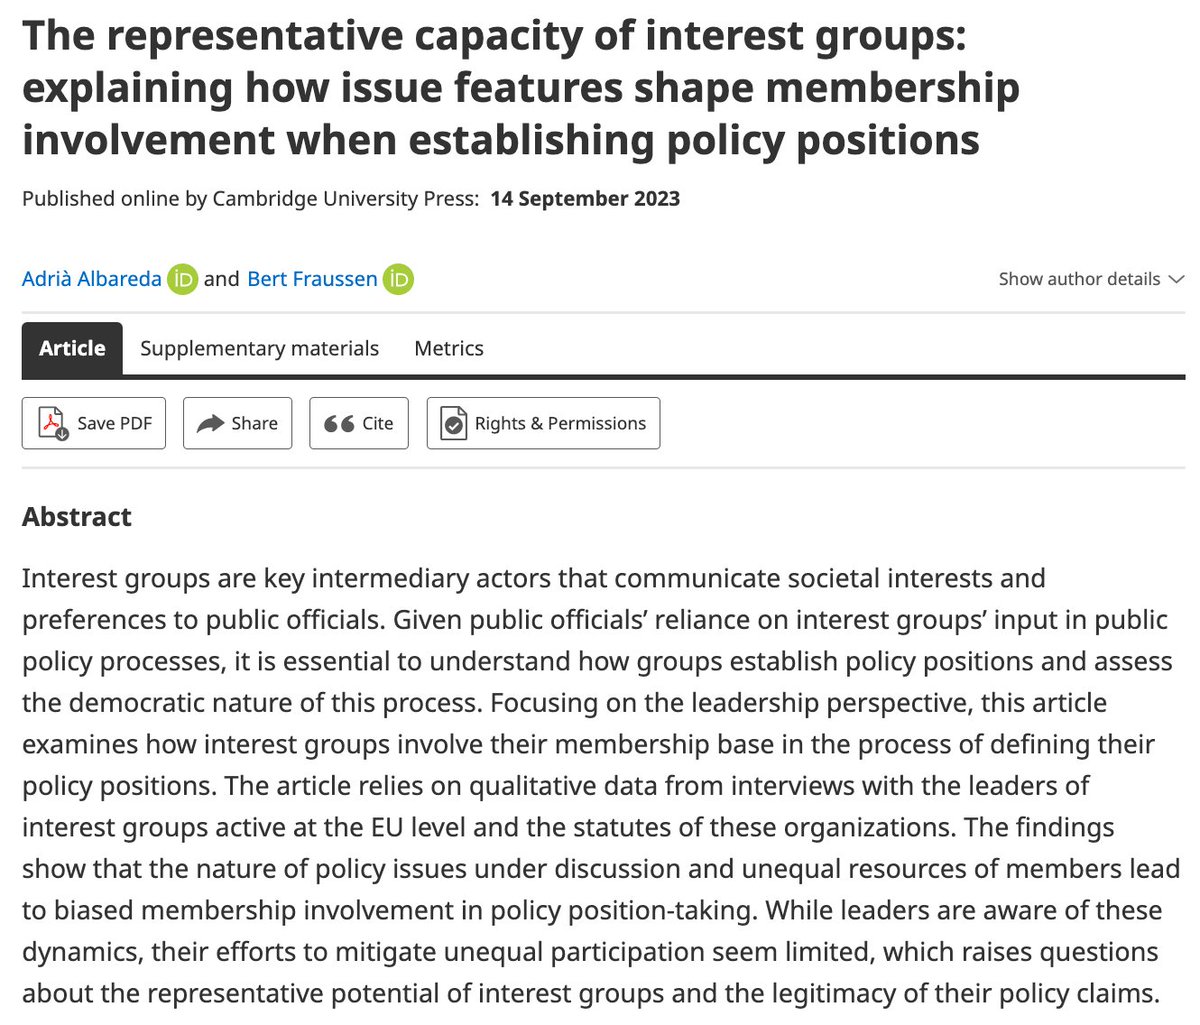 A new interesting article, “The representative capacity of interest groups: explaining how issue features shape membership involvement when establishing policy positions”, by Adrià Albareda and Bert Fraussen is now available on our FirstView page: t.ly/DdLqd